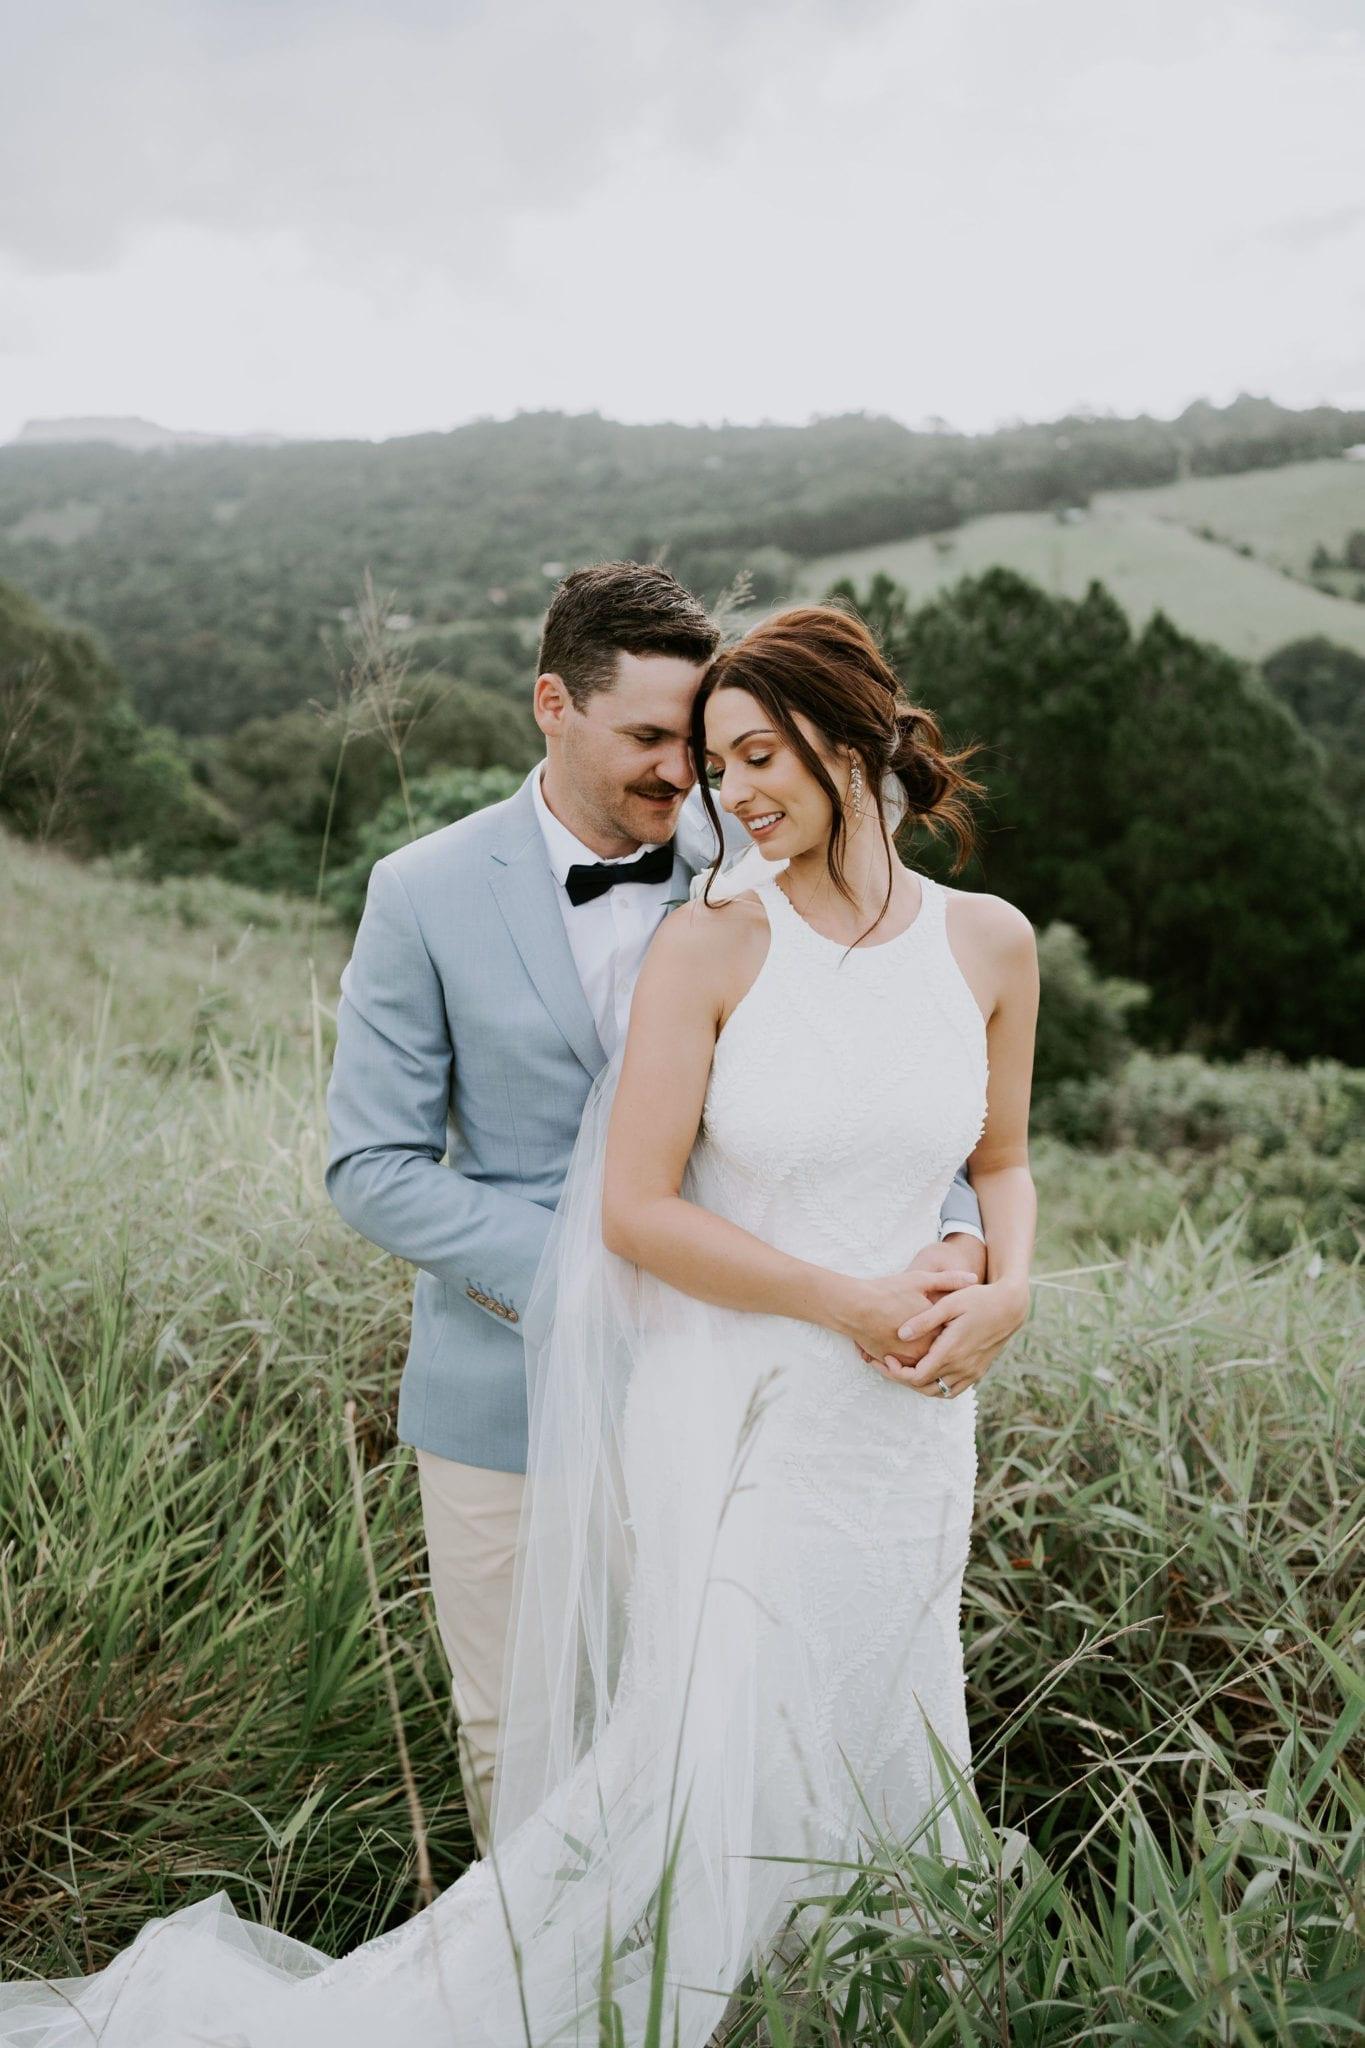 Eloise and Corey’s Modern Rustic Wedding - White Lily Couture